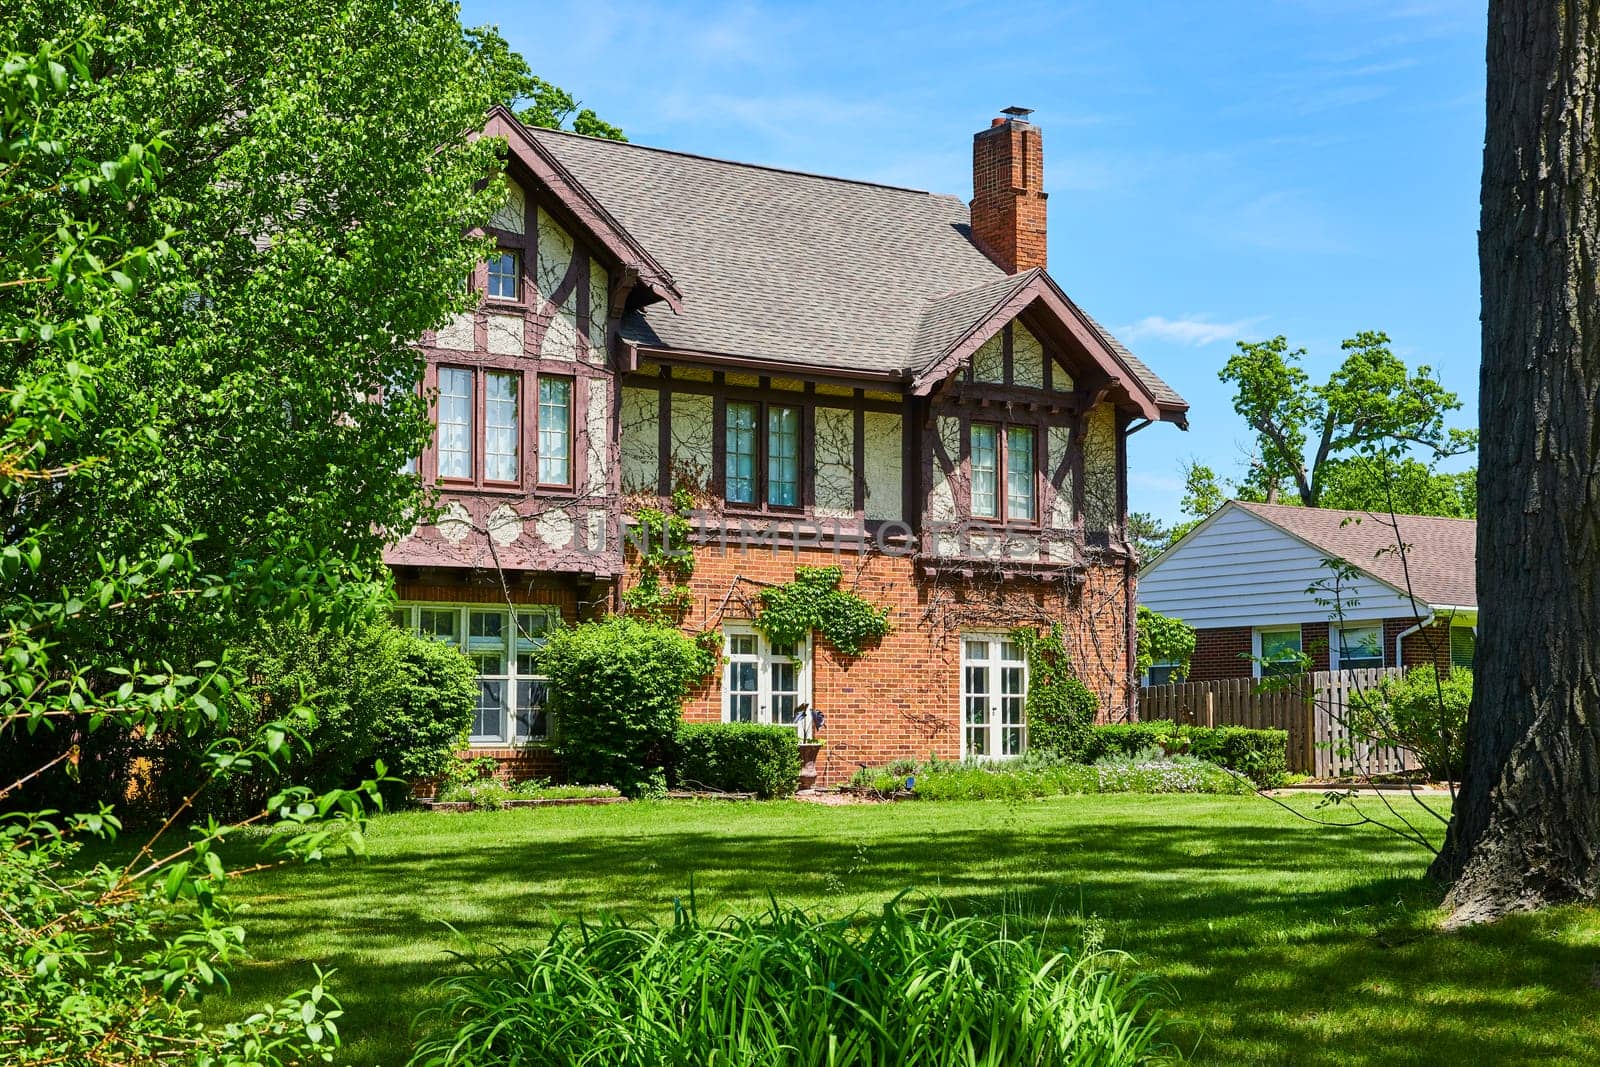 Charming Tudor-style home in South Wayne Historic District, surrounded by lush greenery under a sunny sky.